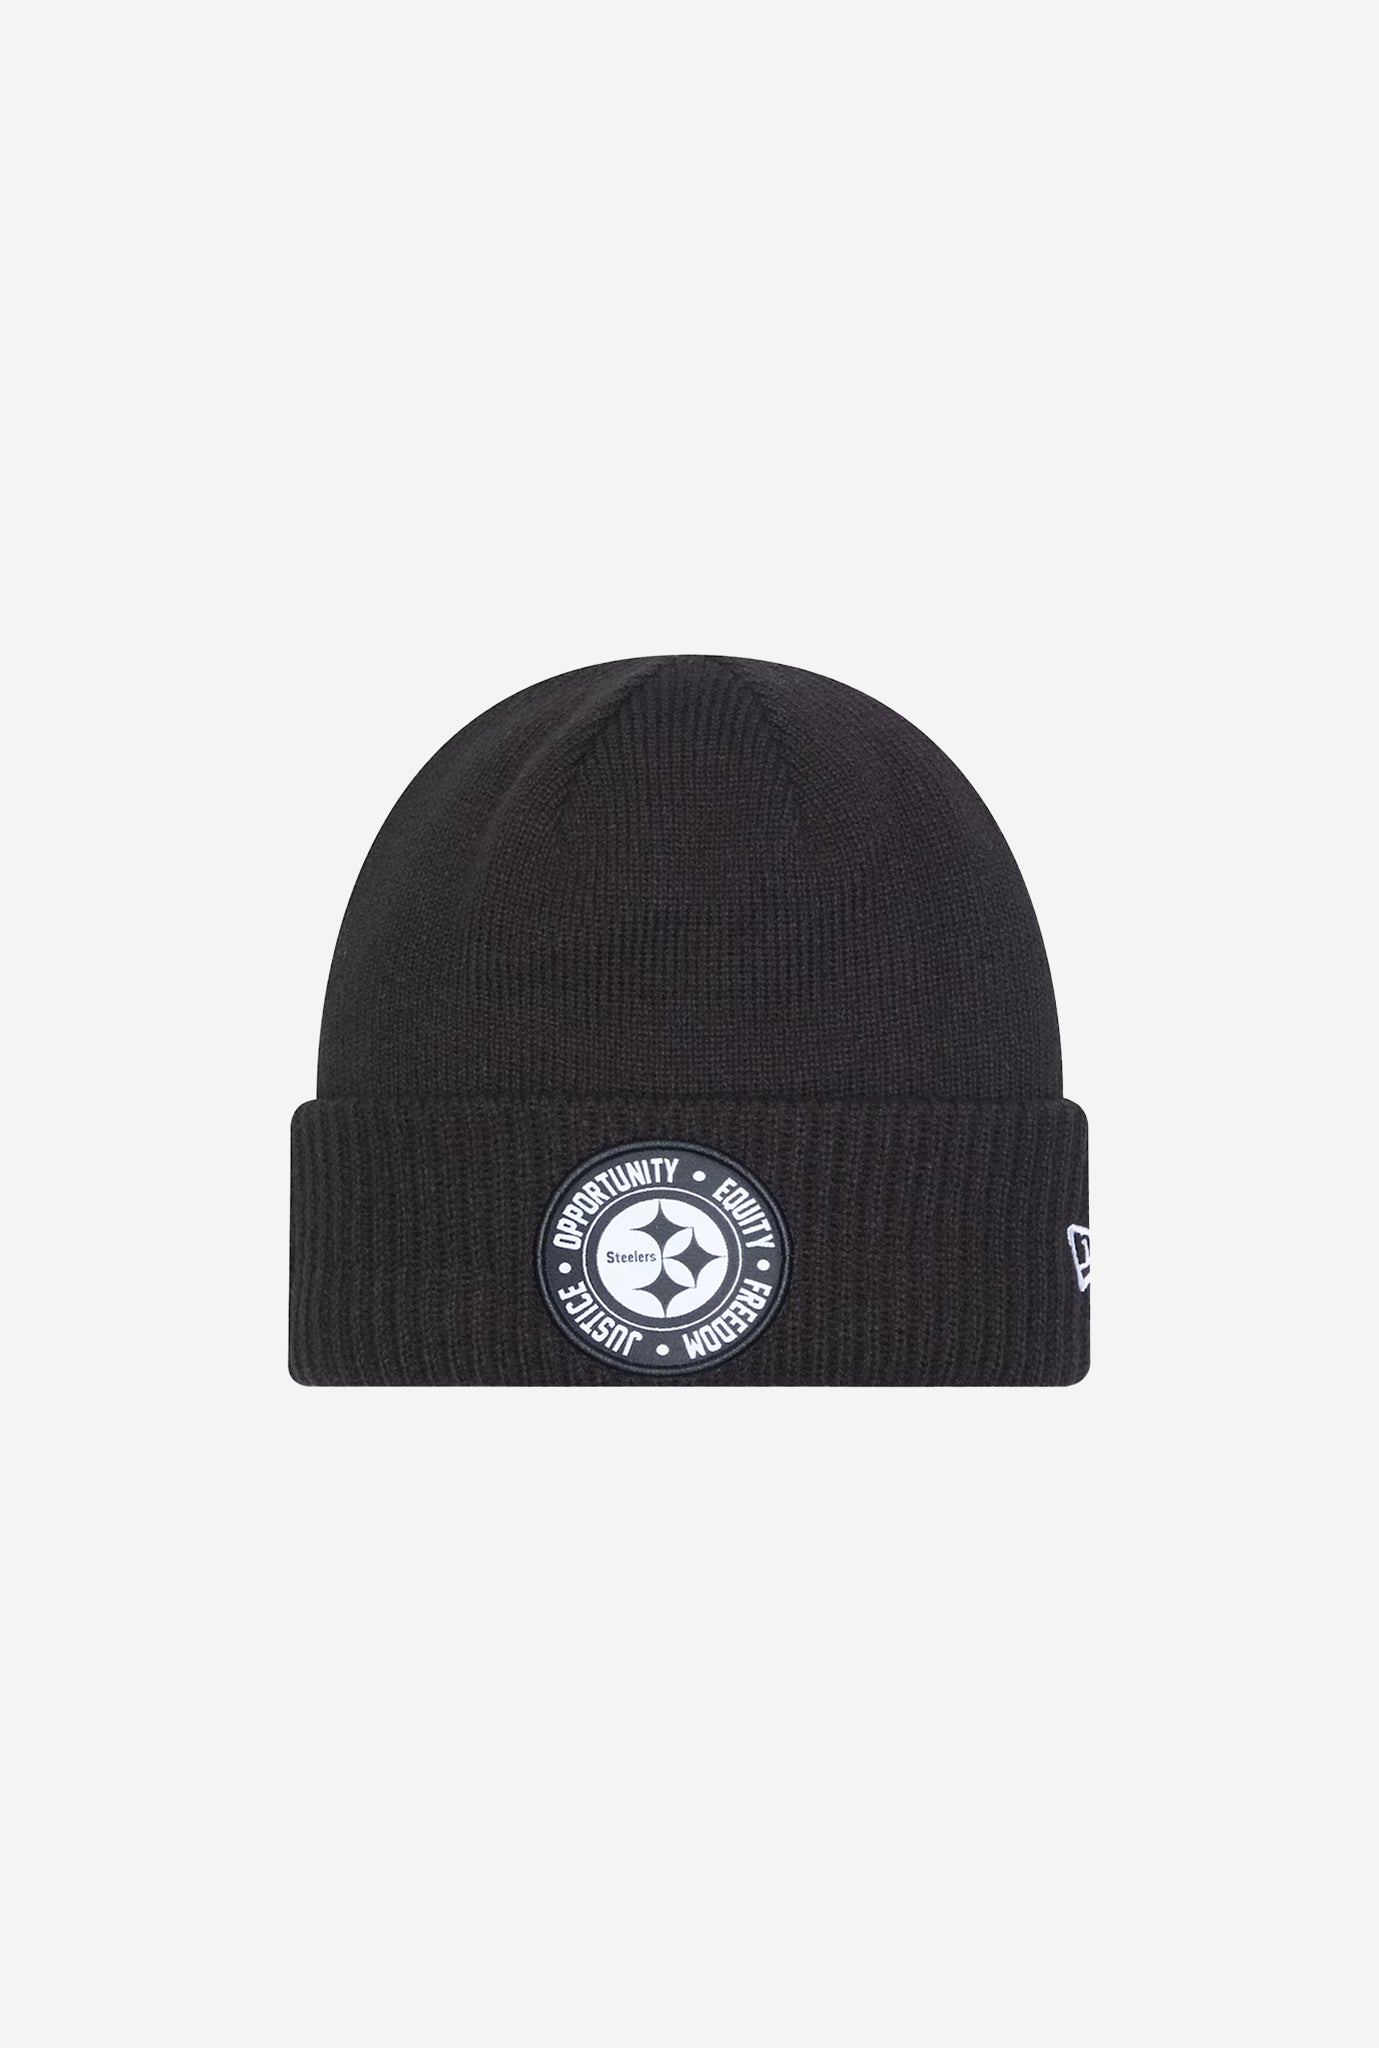 Pittsburgh Steelers Social Justice Knit Beanie